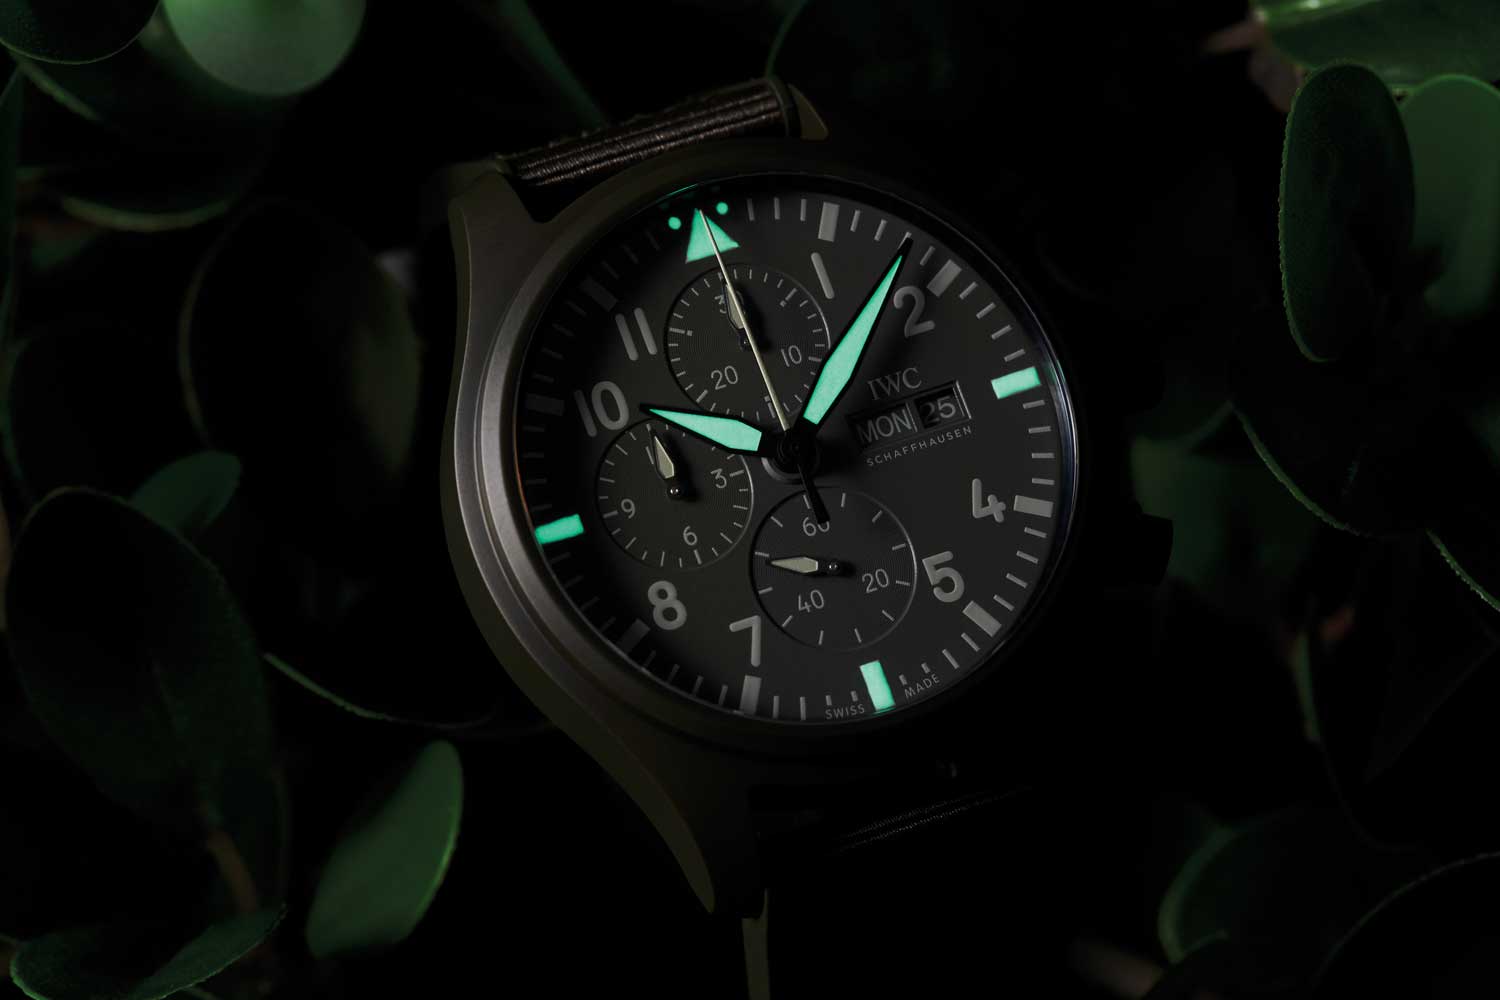 IWC Pilot’s Watch Chronograph TOP GUN Edition in “IWC Woodland” green takes inspiration from flight suits of naval aviators for a clean utilitarian appearance